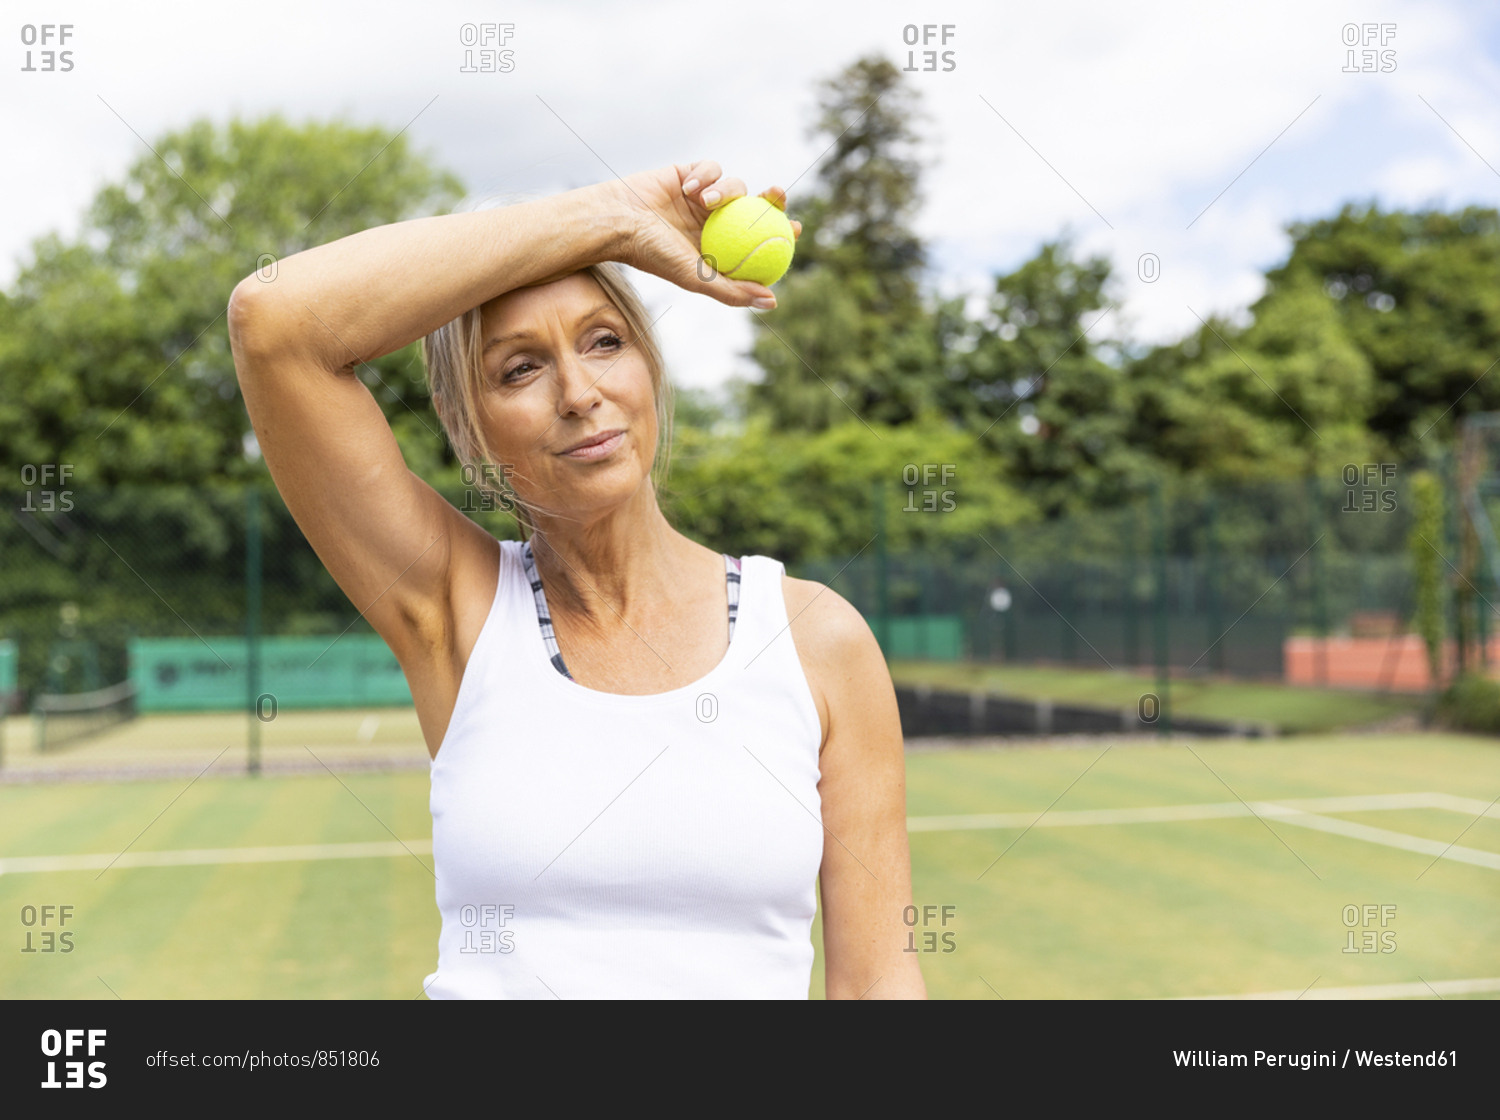 Tired female tennis player taking a break on grass court at tennis club